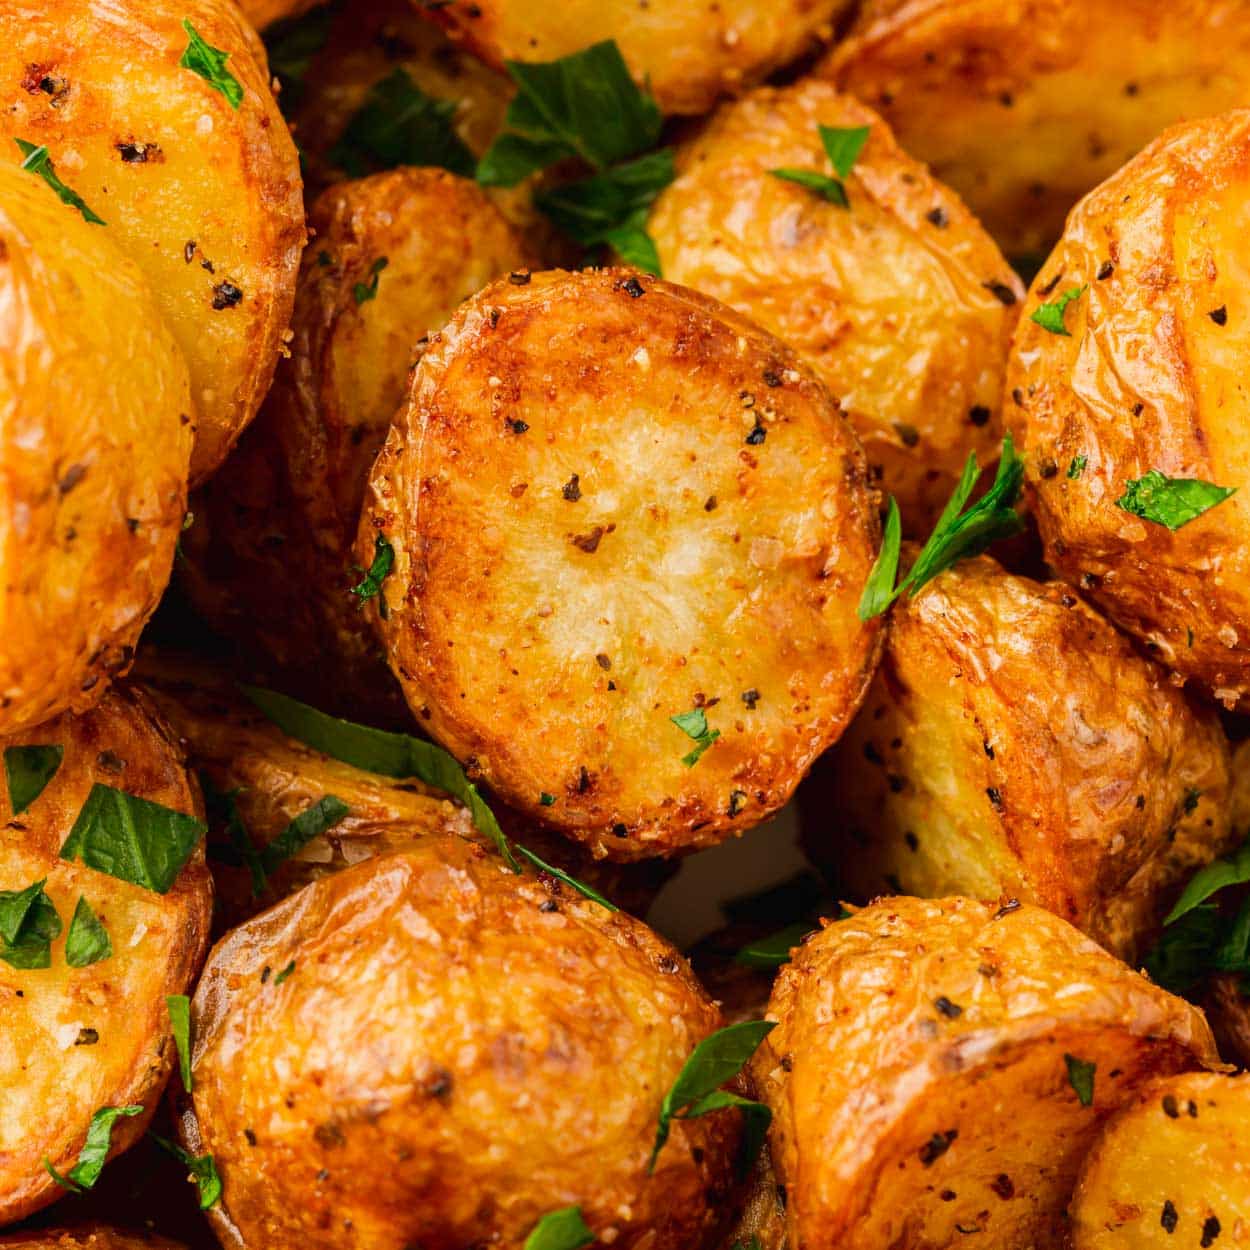 closeup view of roasted potatoes garnished with fresh herbs.